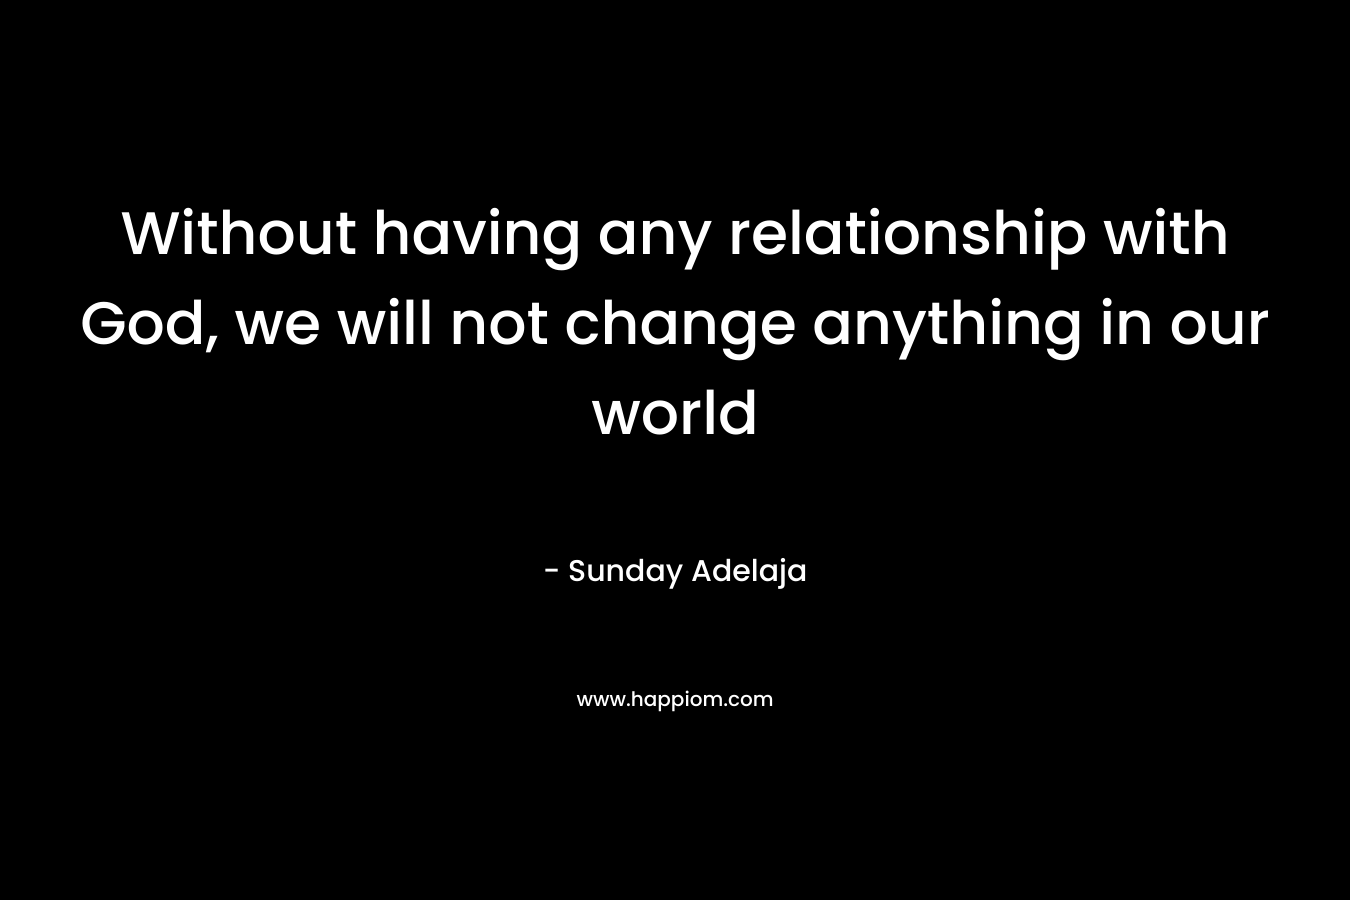 Without having any relationship with God, we will not change anything in our world